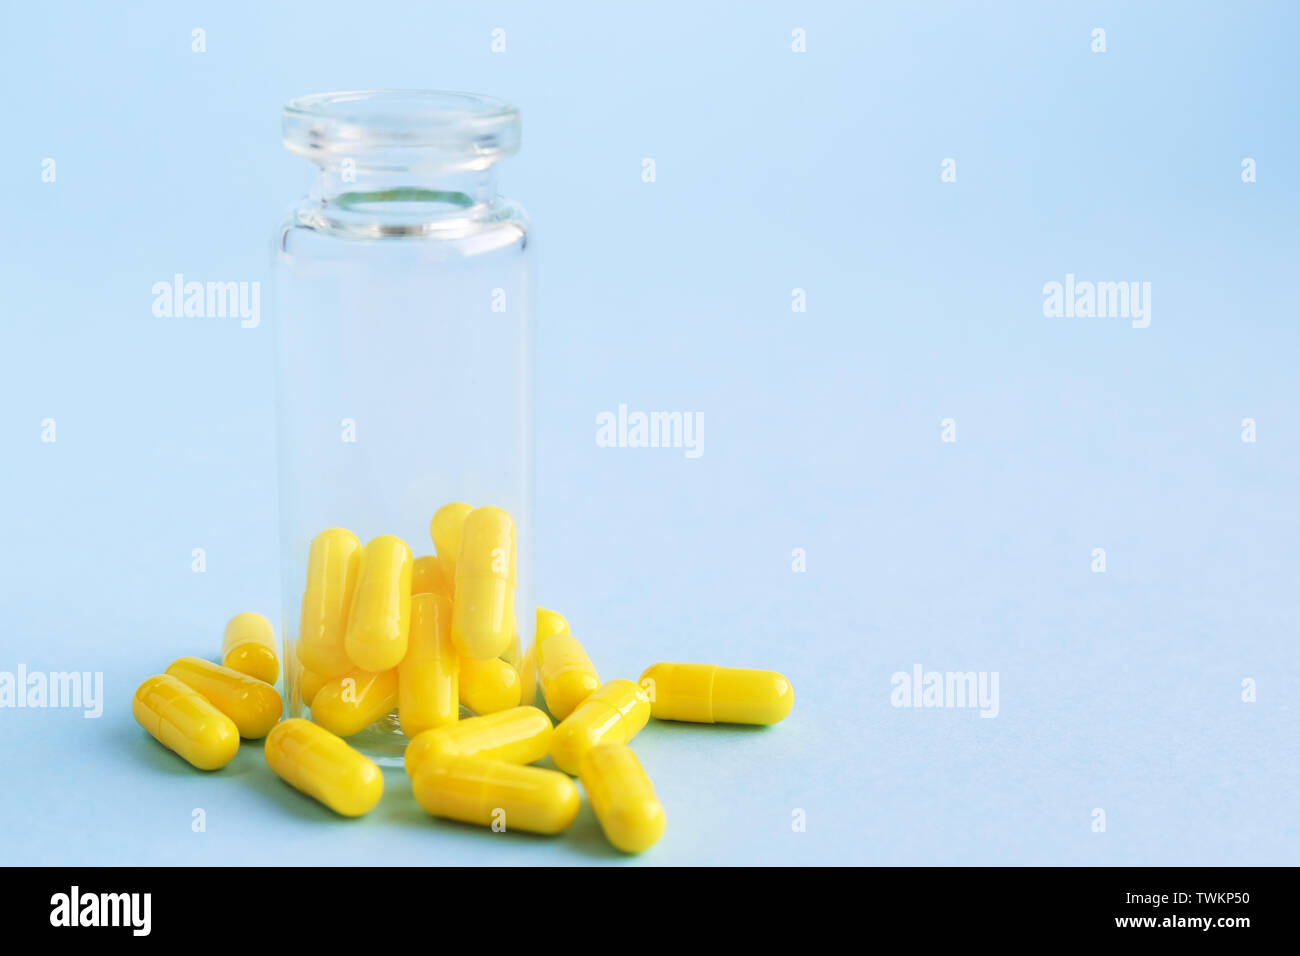 Download Yellow Capsules From Glass Bottle On Blue Background Copyspace For Text Epidemic Painkillers Healthcare Treatment Pills And Drug Abuse Concept Stock Photo Alamy Yellowimages Mockups